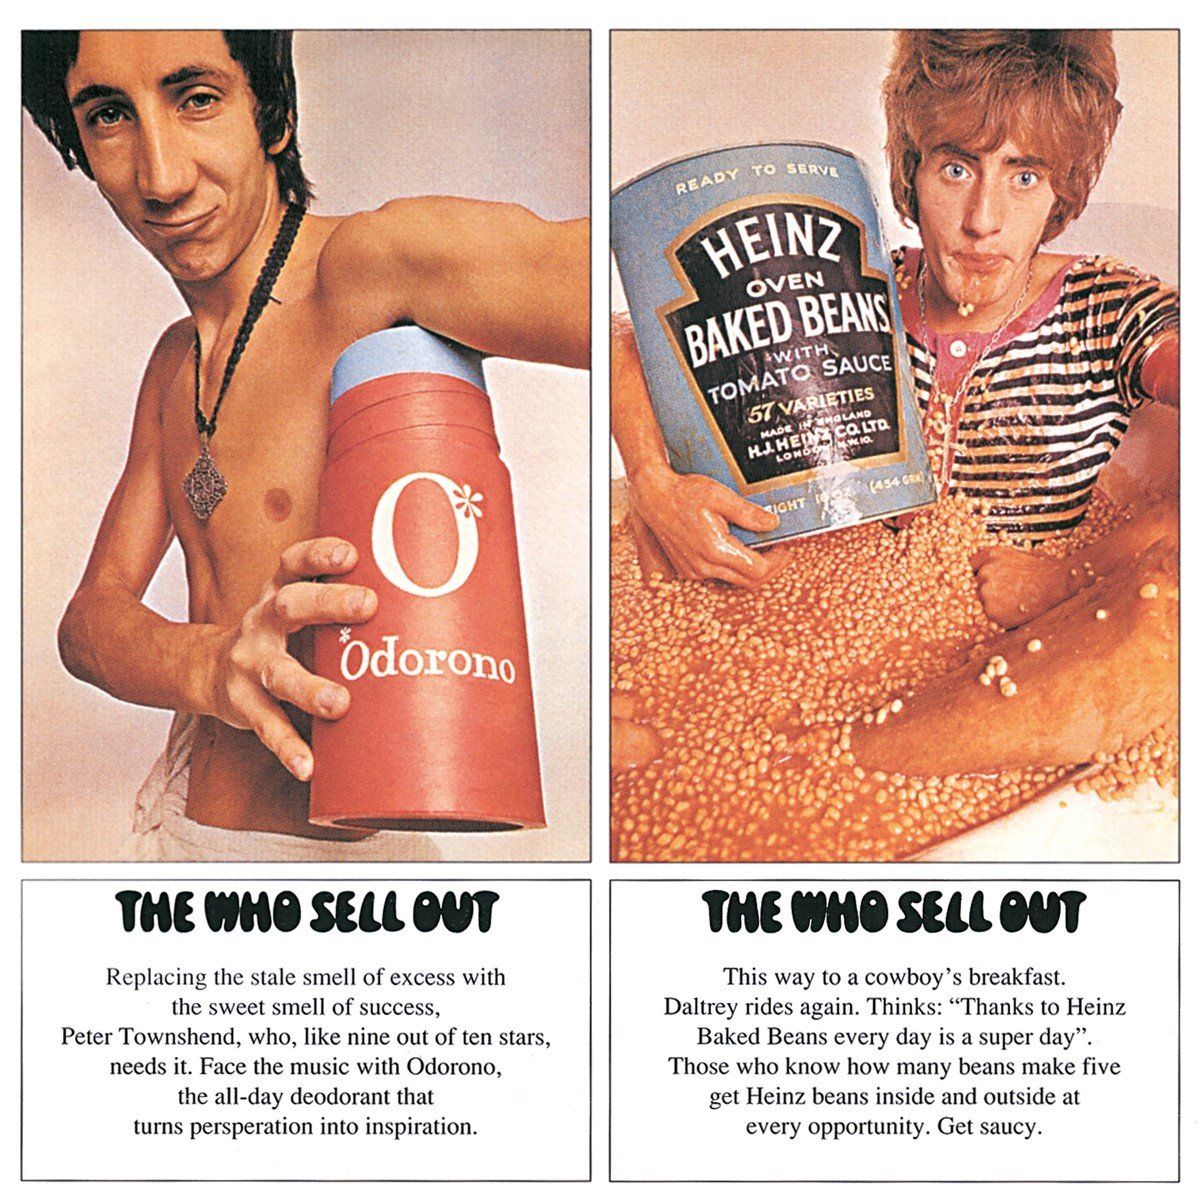 THE WHO SELL OUT HALF-SPEE